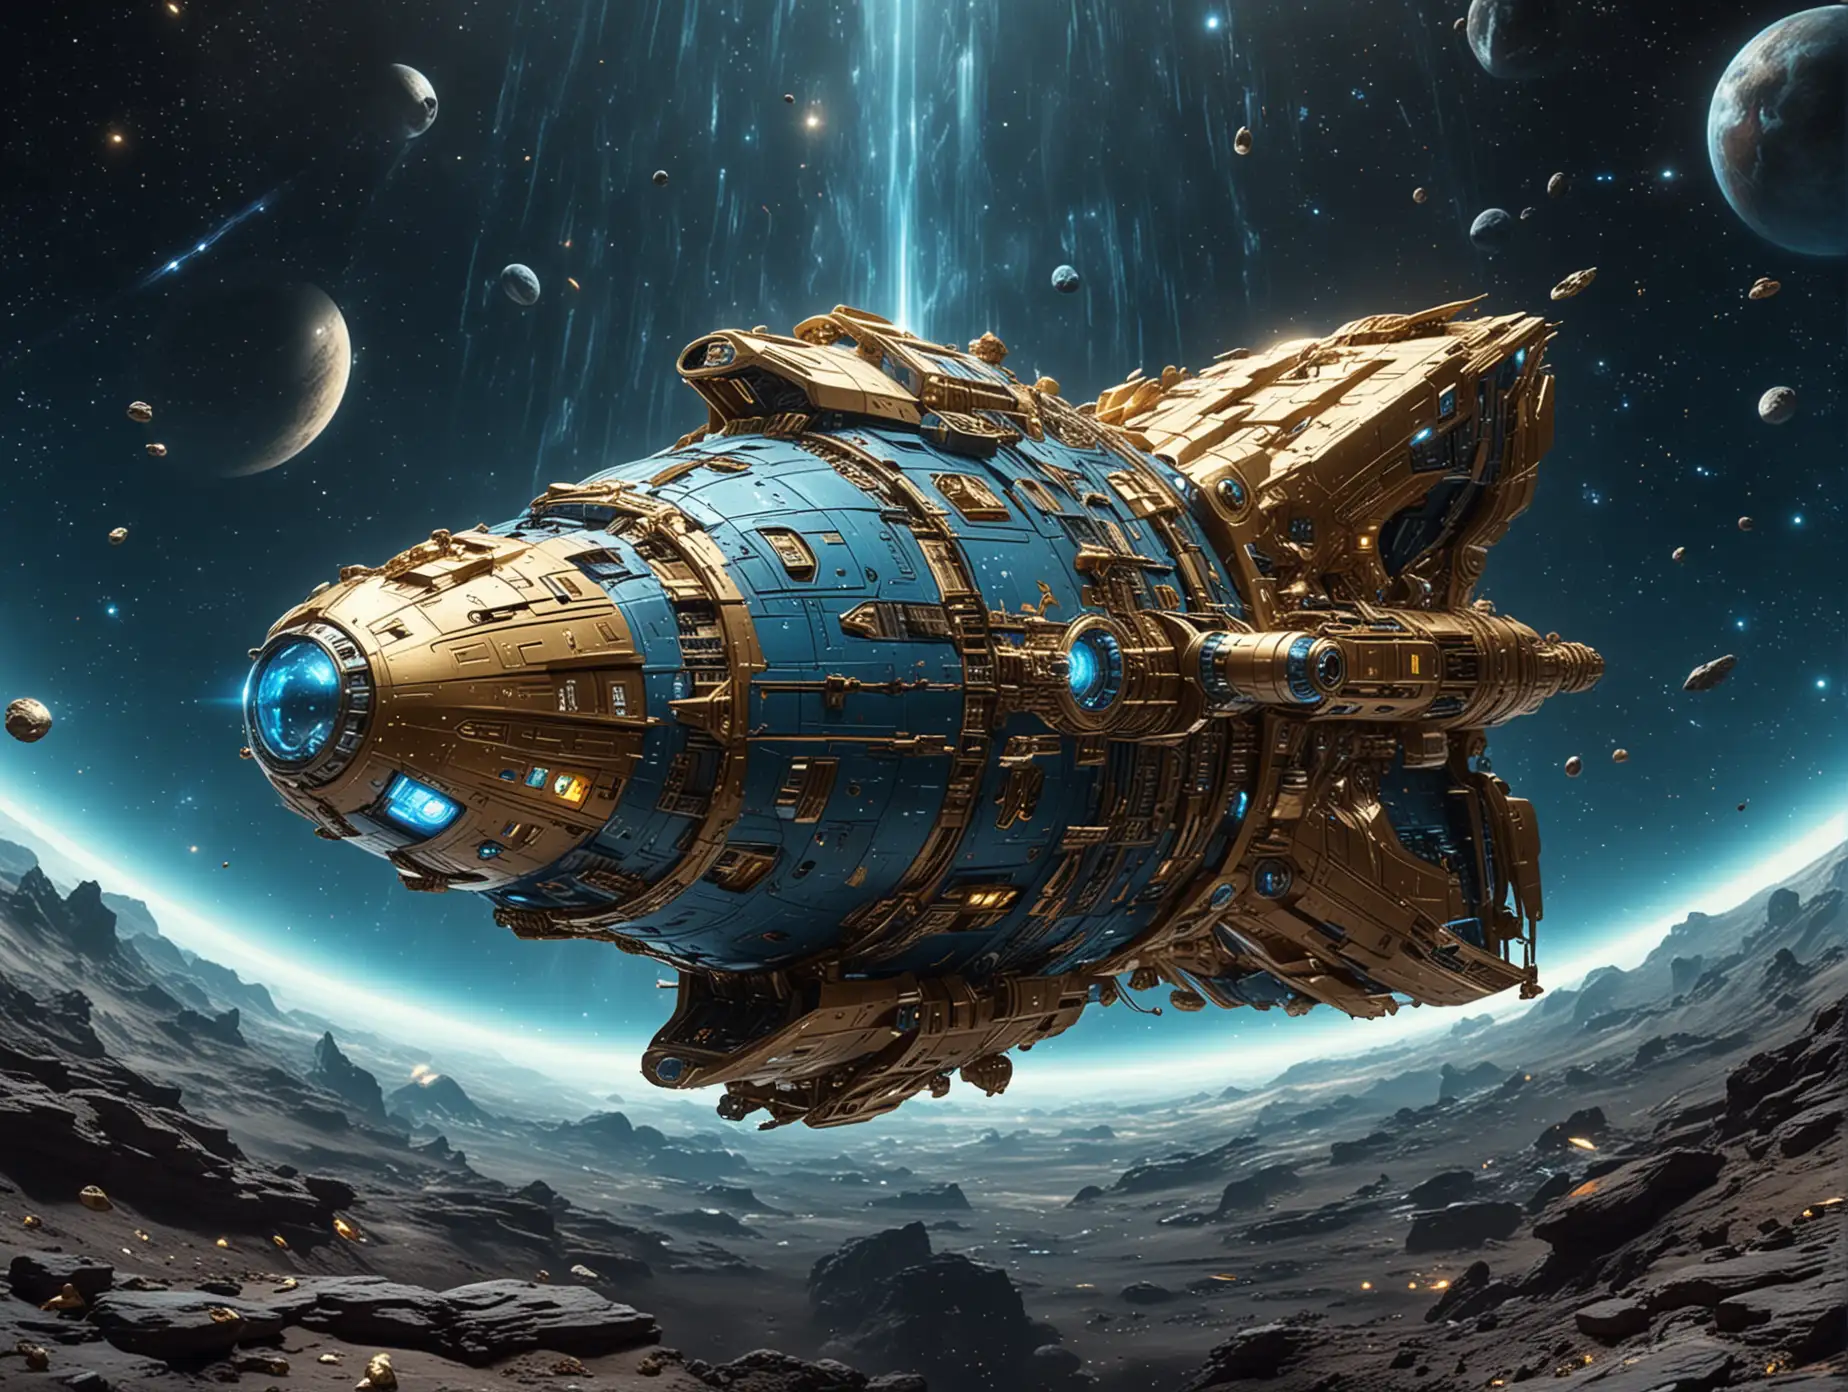 Futuristic-BlueGolden-Spaceship-with-Abundant-Resources-and-Gold-in-Space